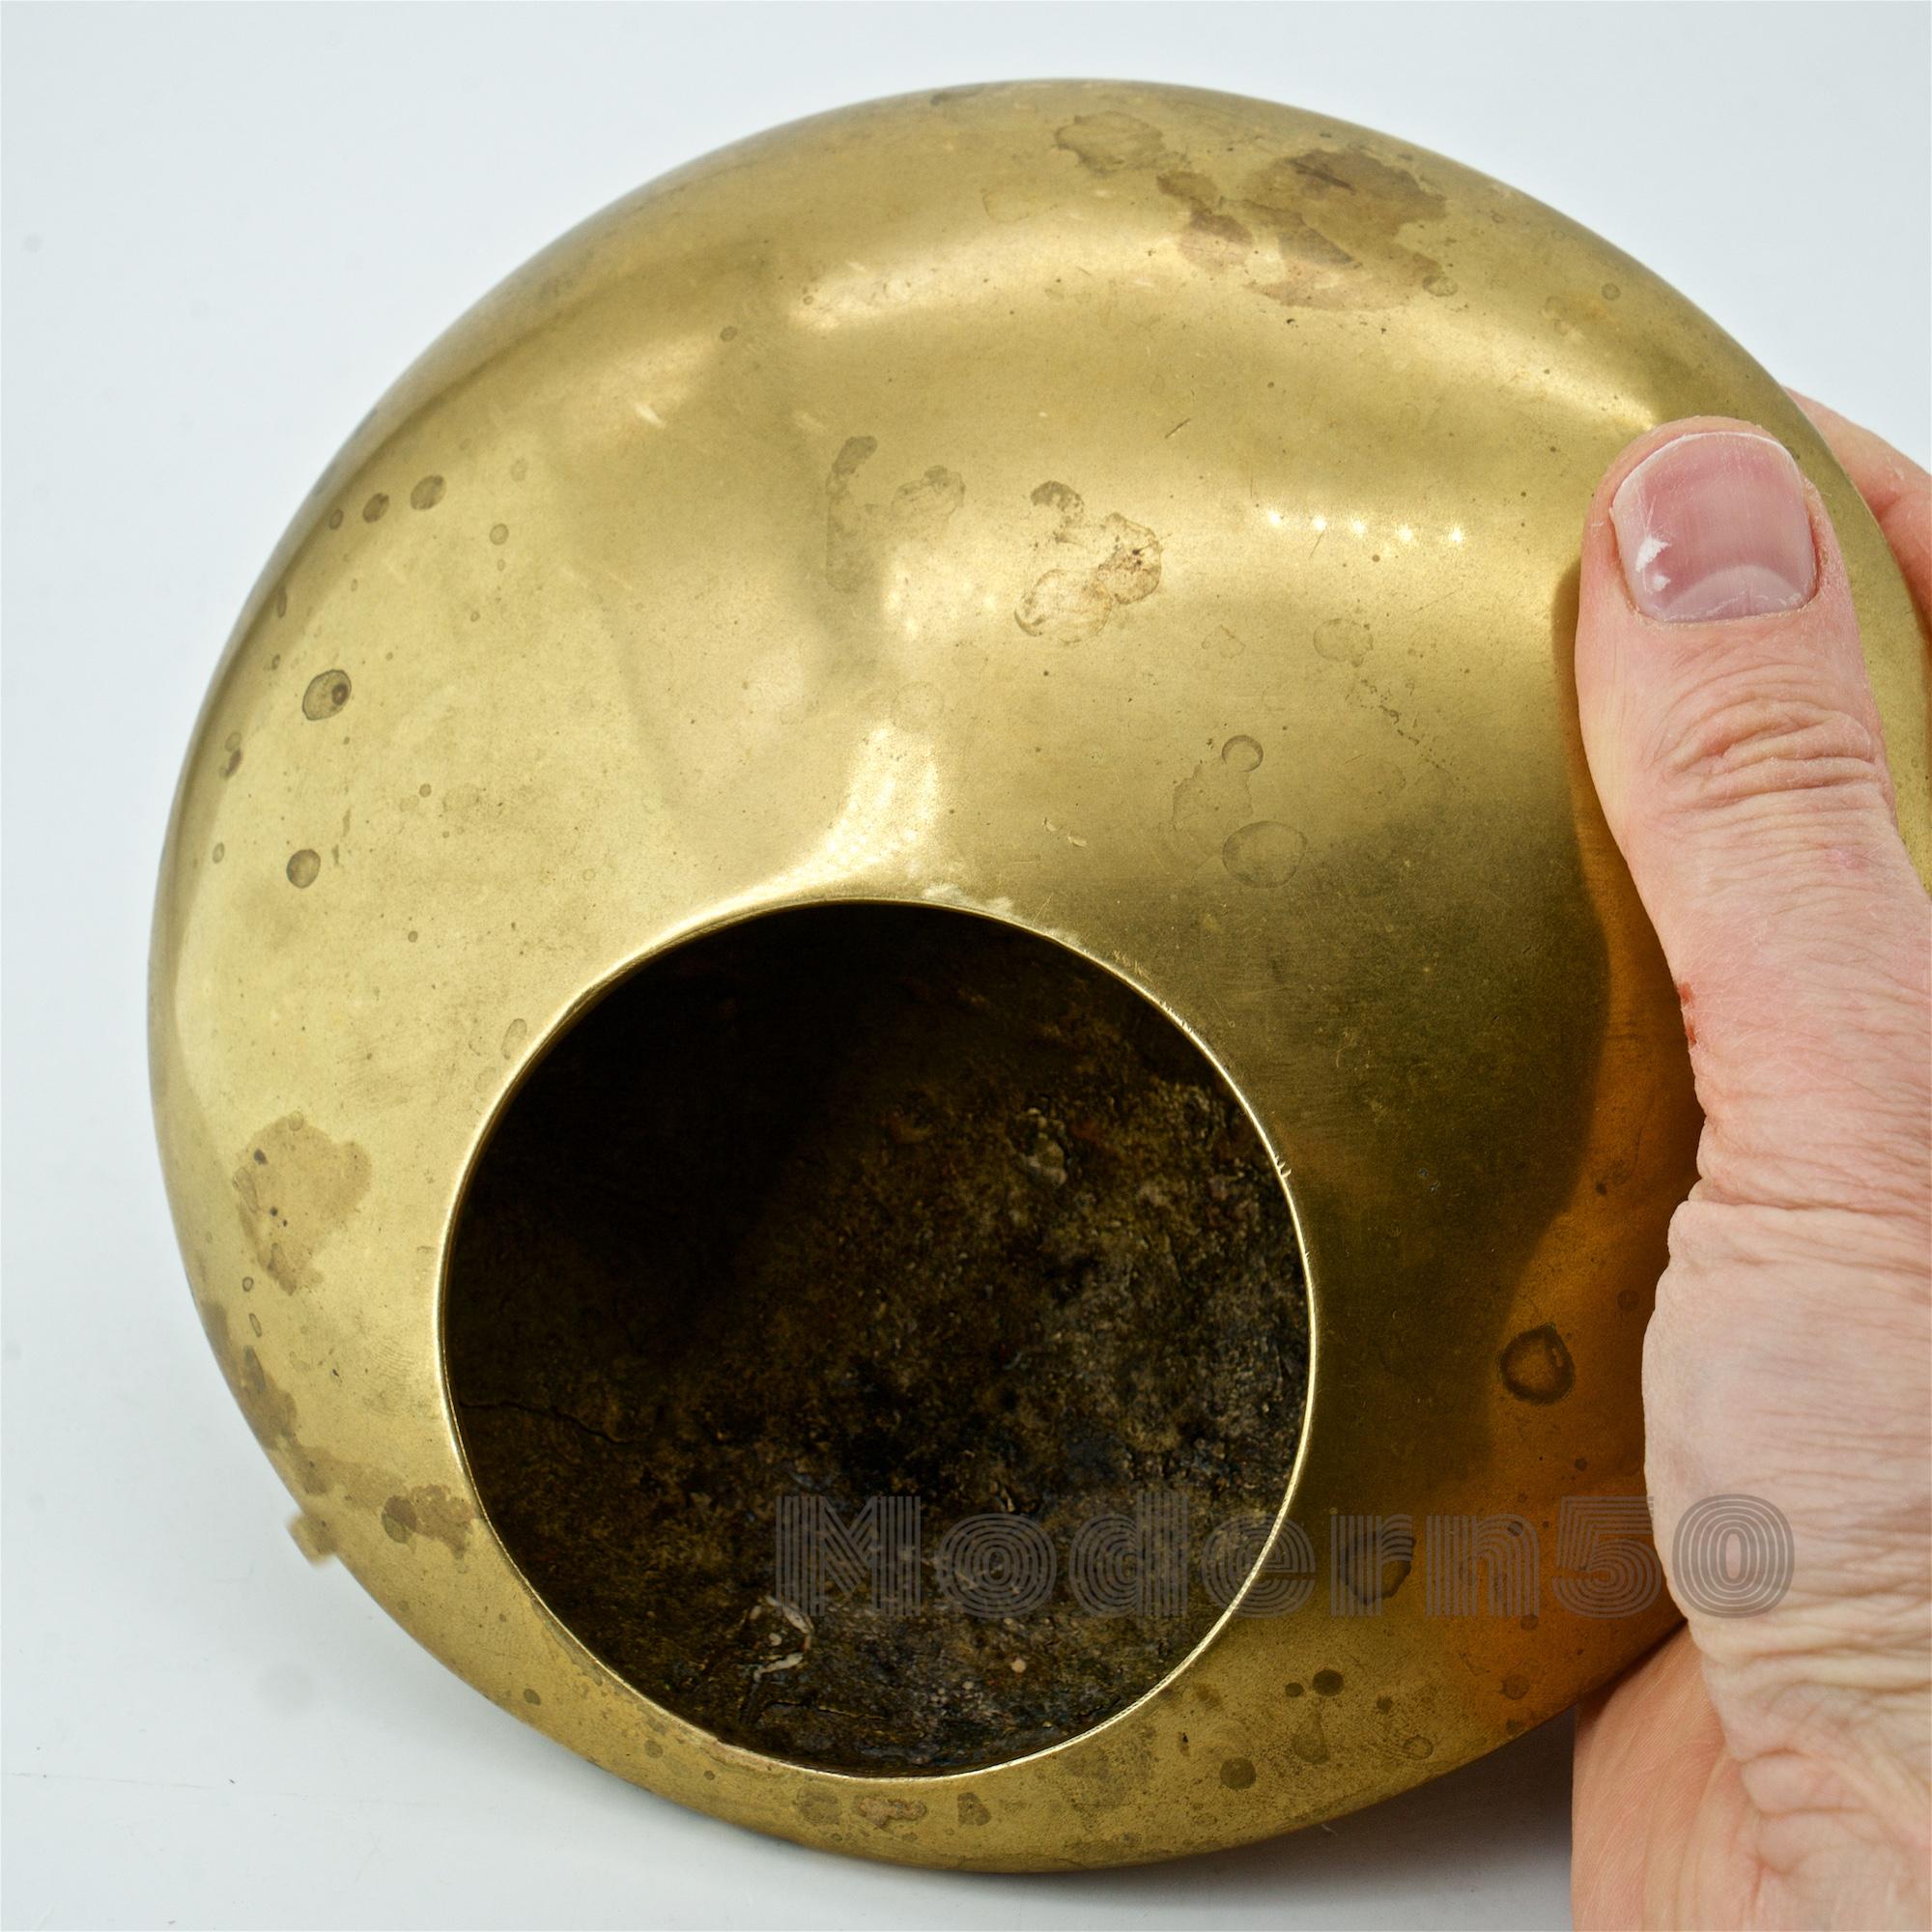 Cast 1970s Roger Tallon Brass Orb Sculpture Midcentury Space Age UFO Cigar Ashtray